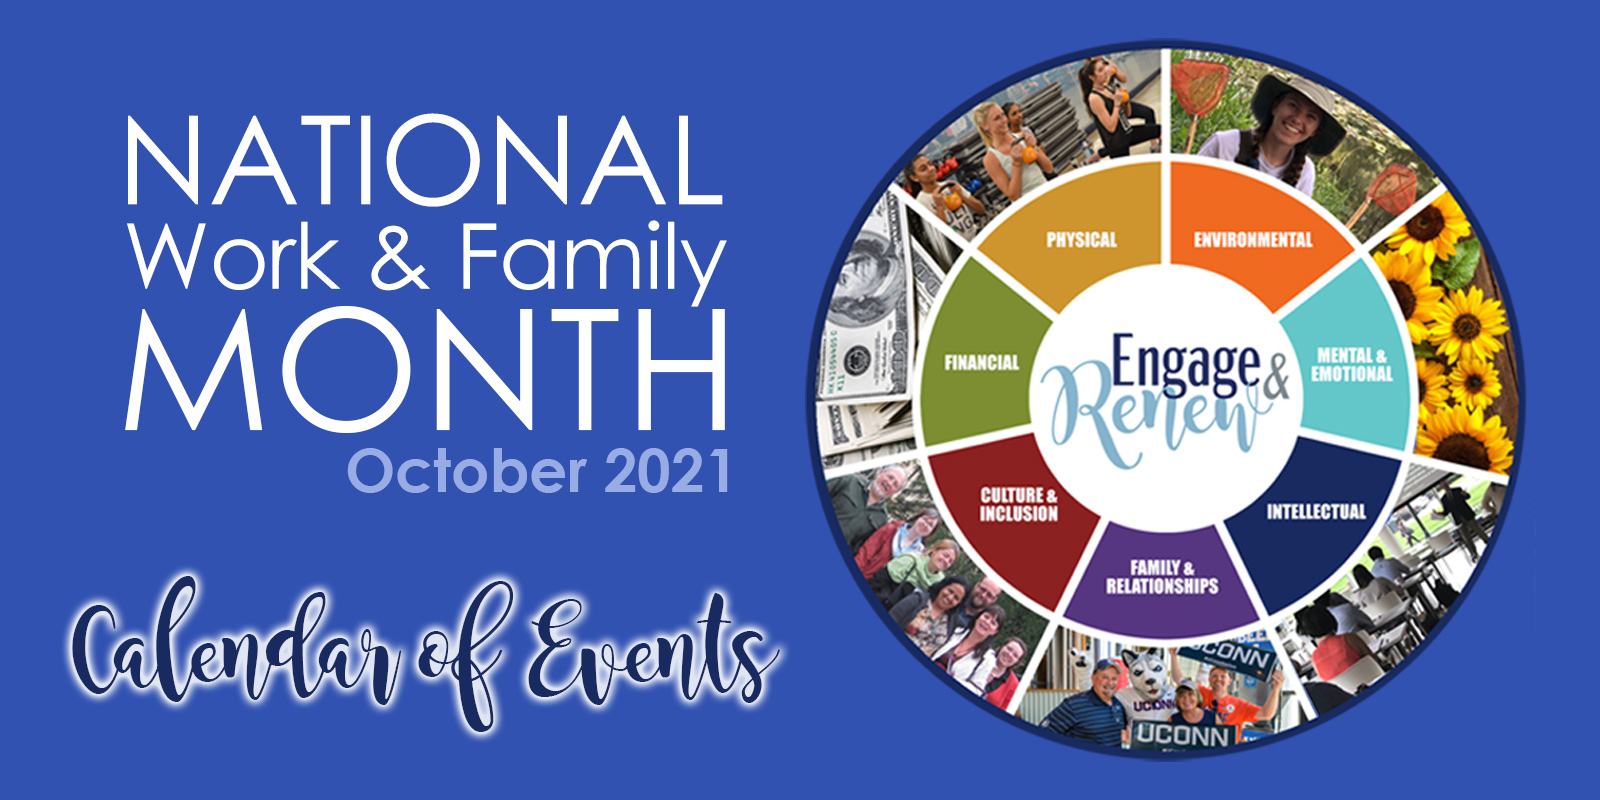 National Work & Family Month 2021 - Calendar of Events